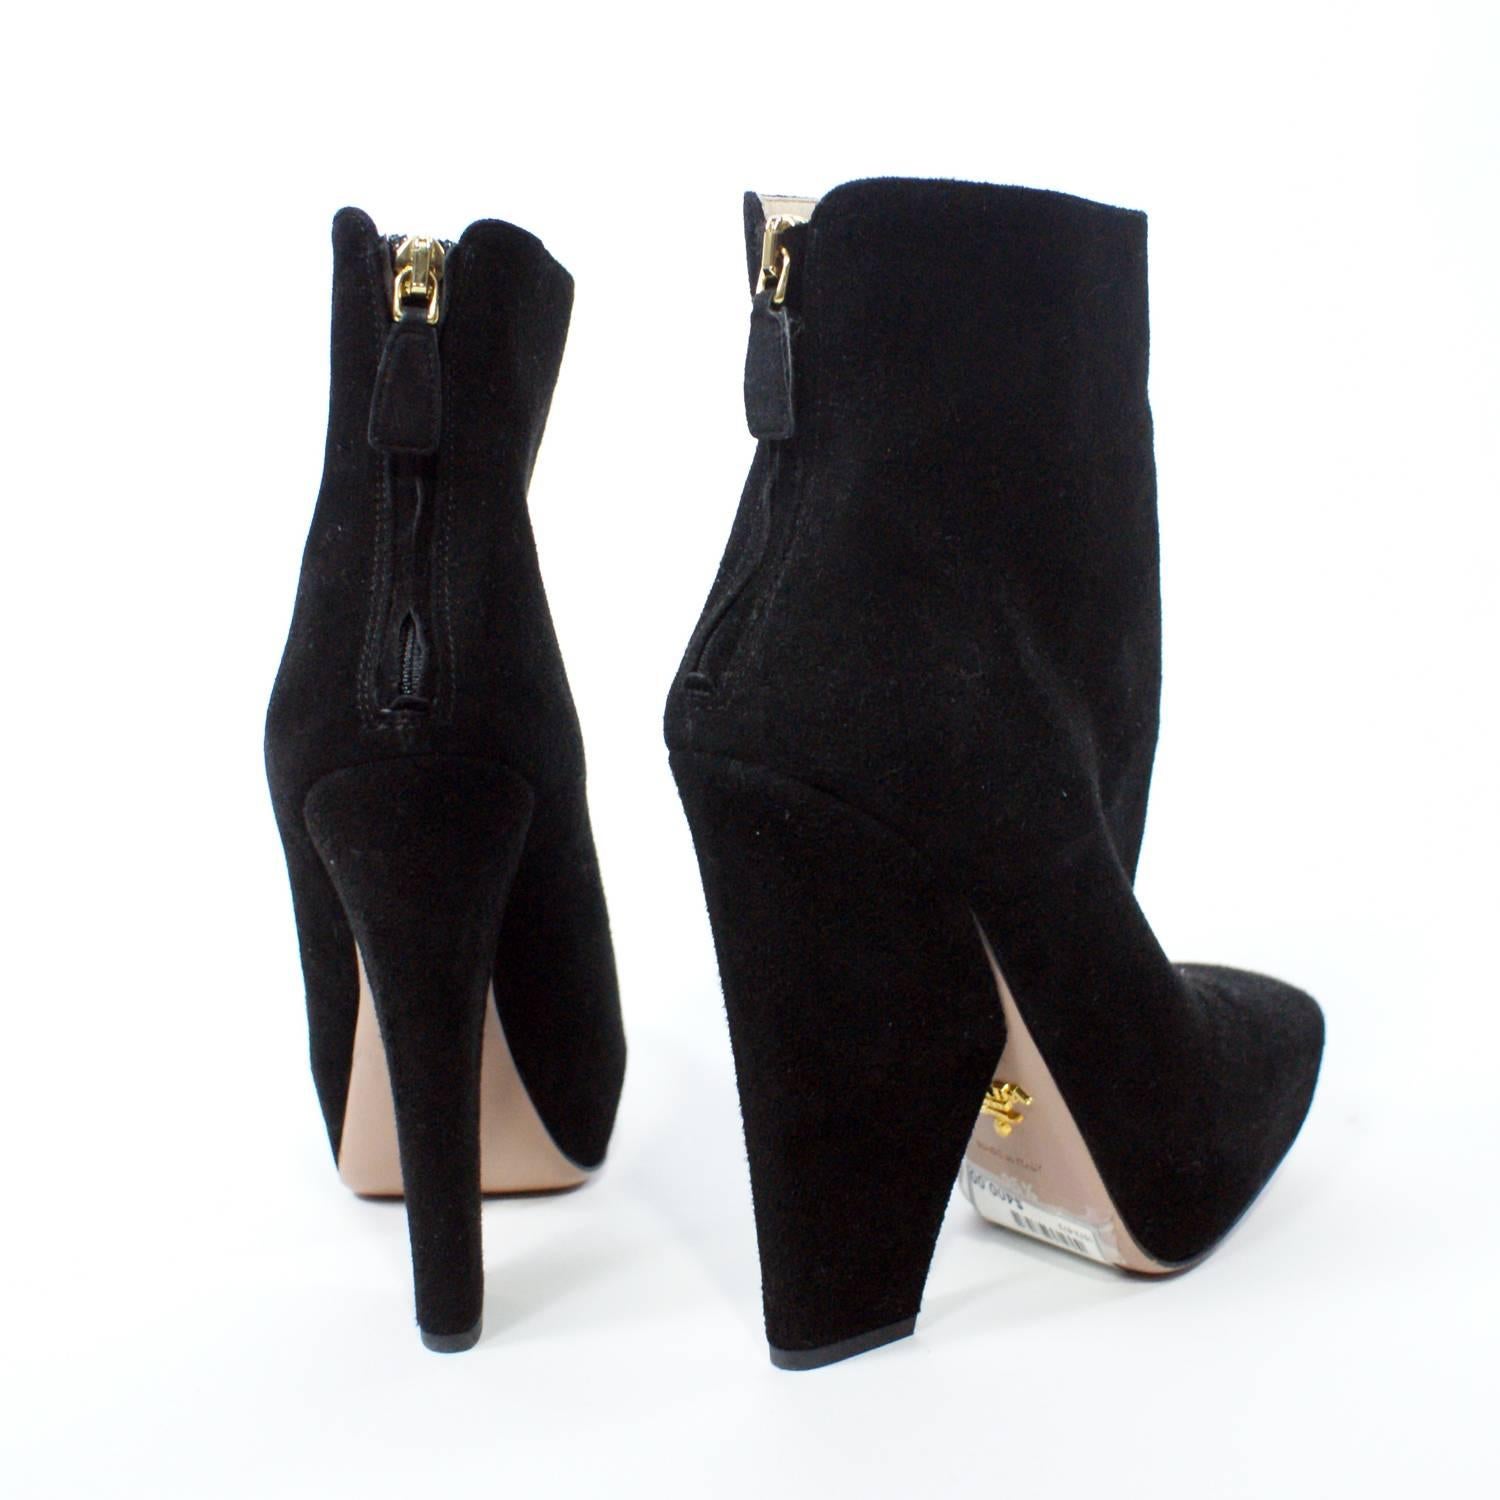 Prada Black Suede Thick Heel Ankle Boots In Excellent Condition For Sale In Narberth, PA